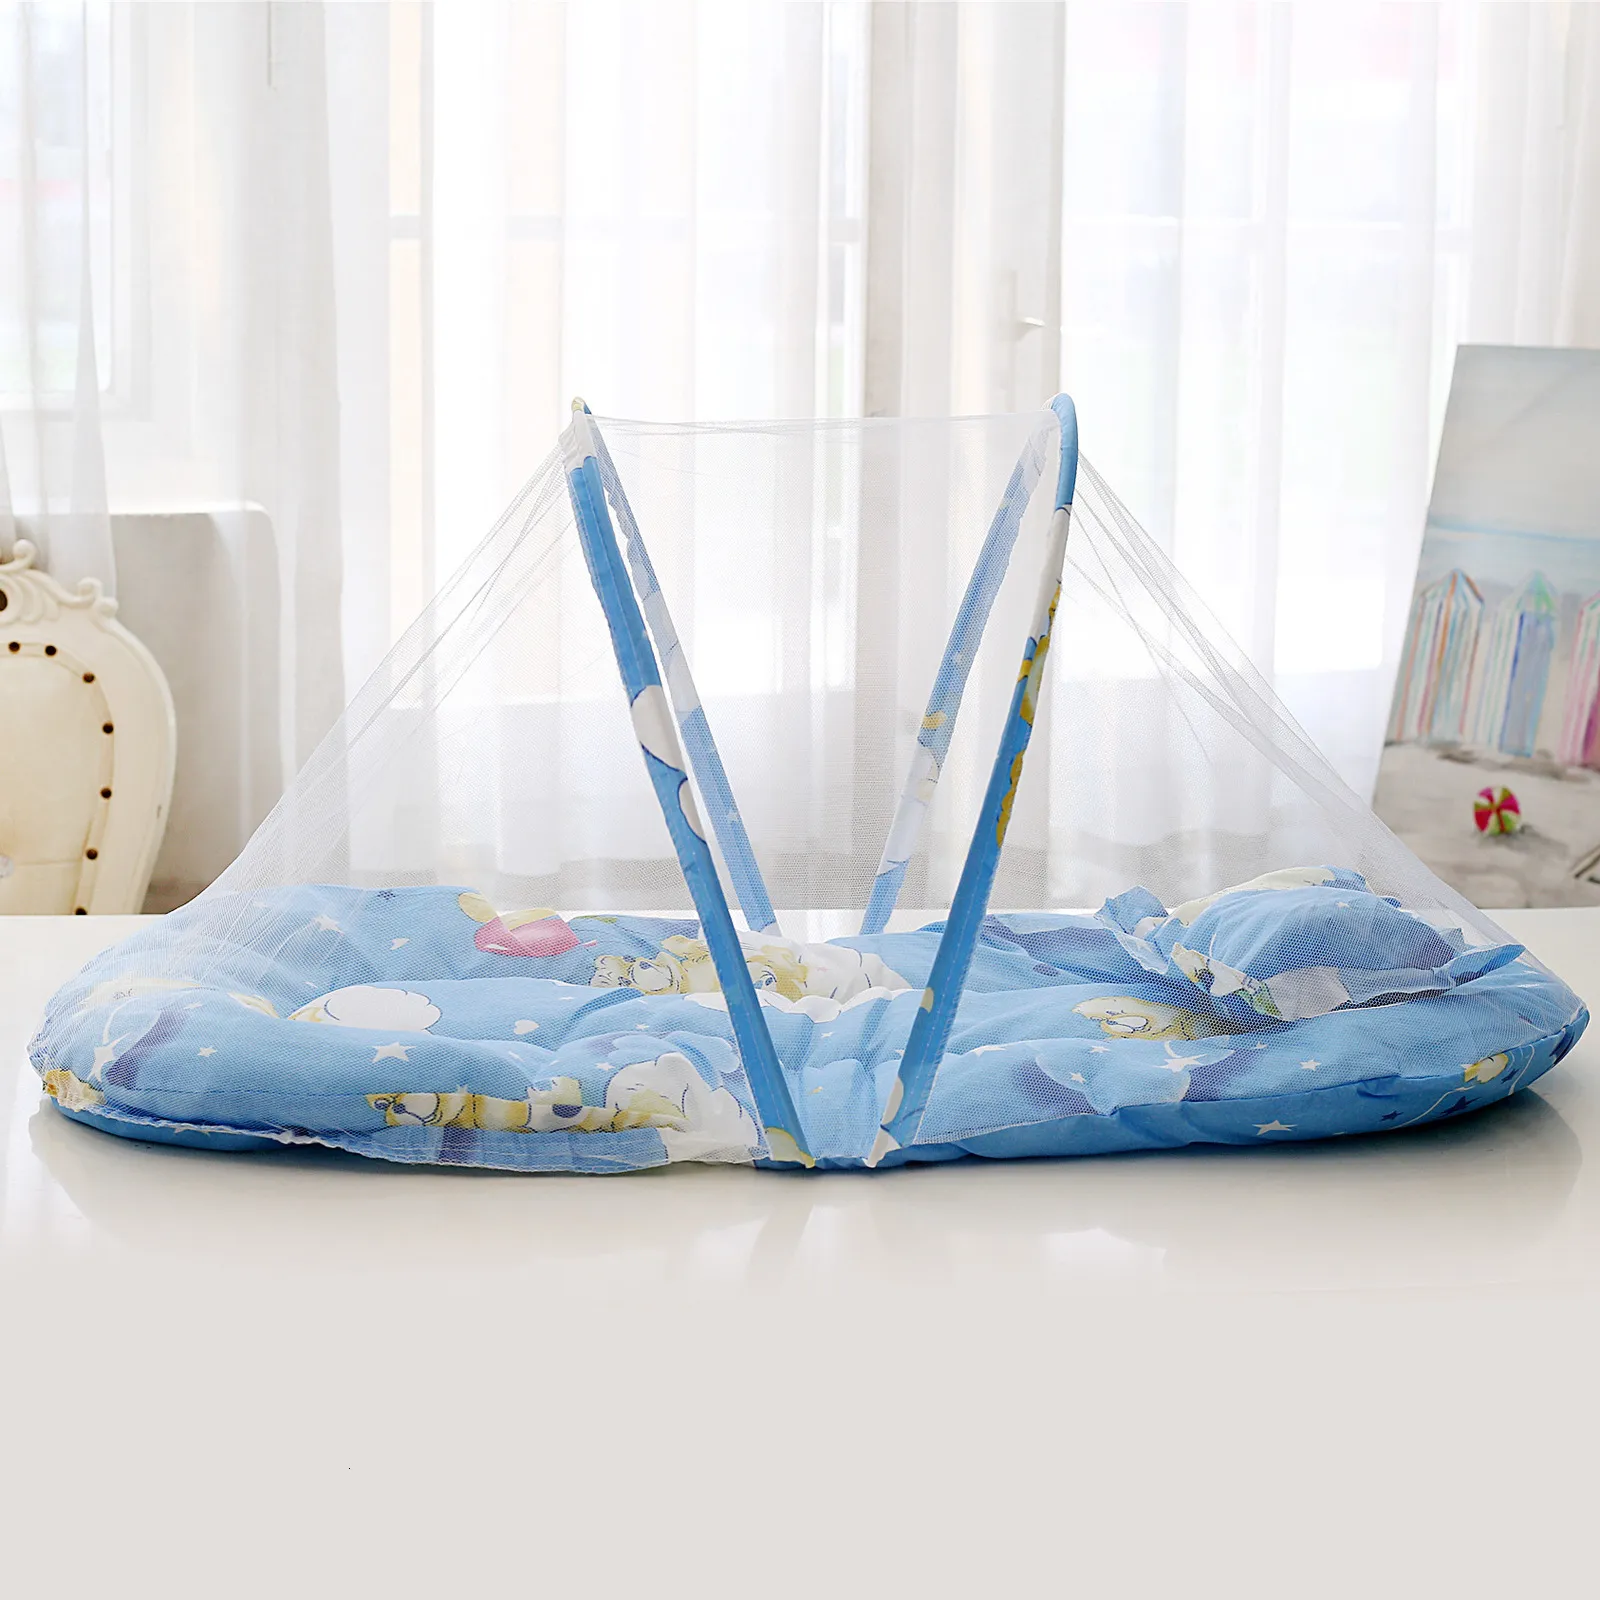 Portable Foldable Travel Cot Mosquito Net For Baby Crib Polyester